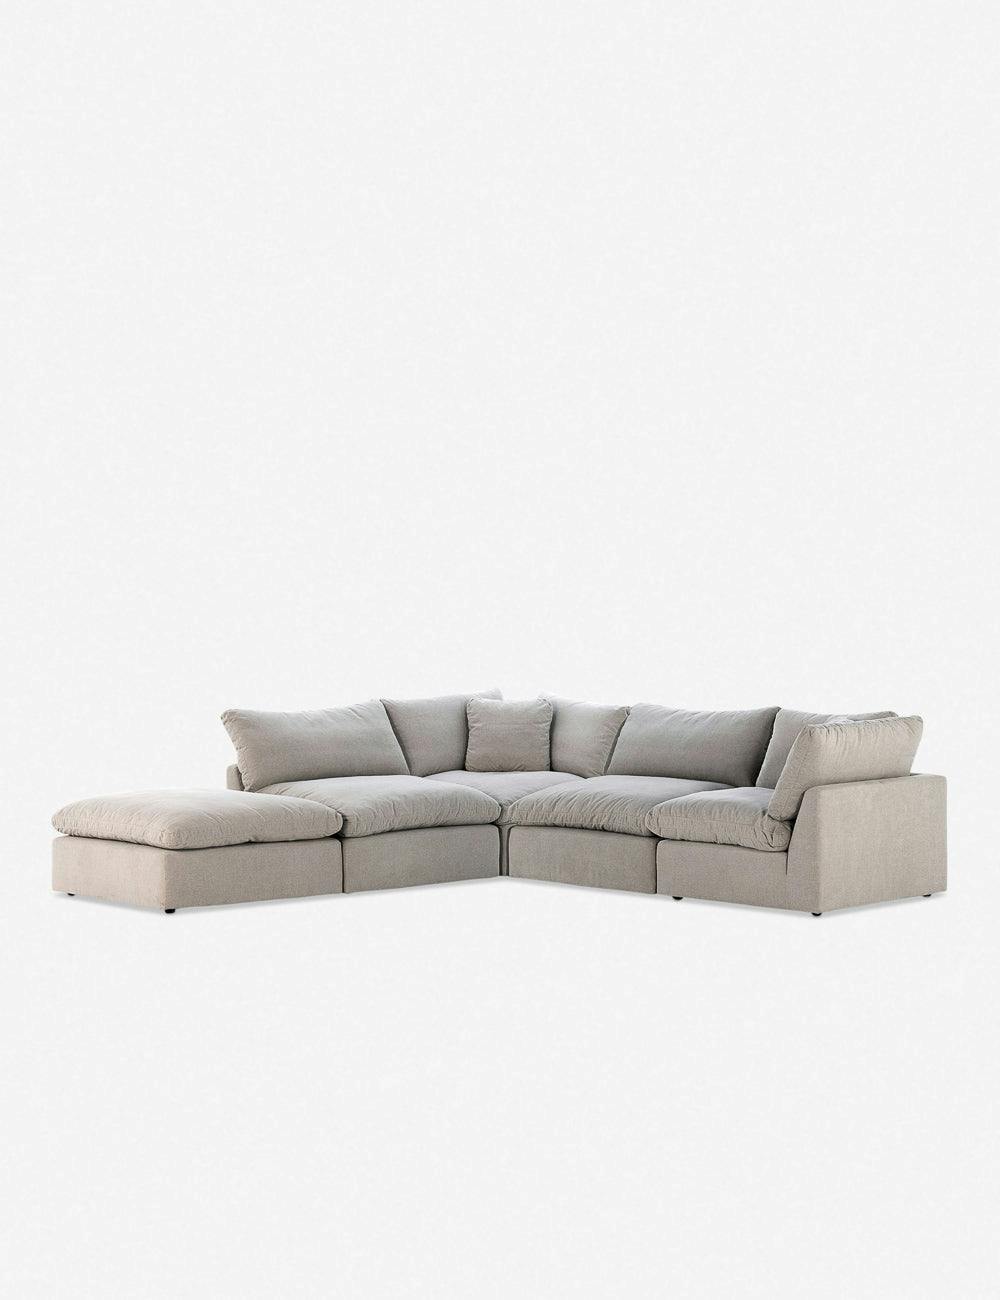 Destin Flannel Luxe 4-Piece Sectional Sofa with Ottoman